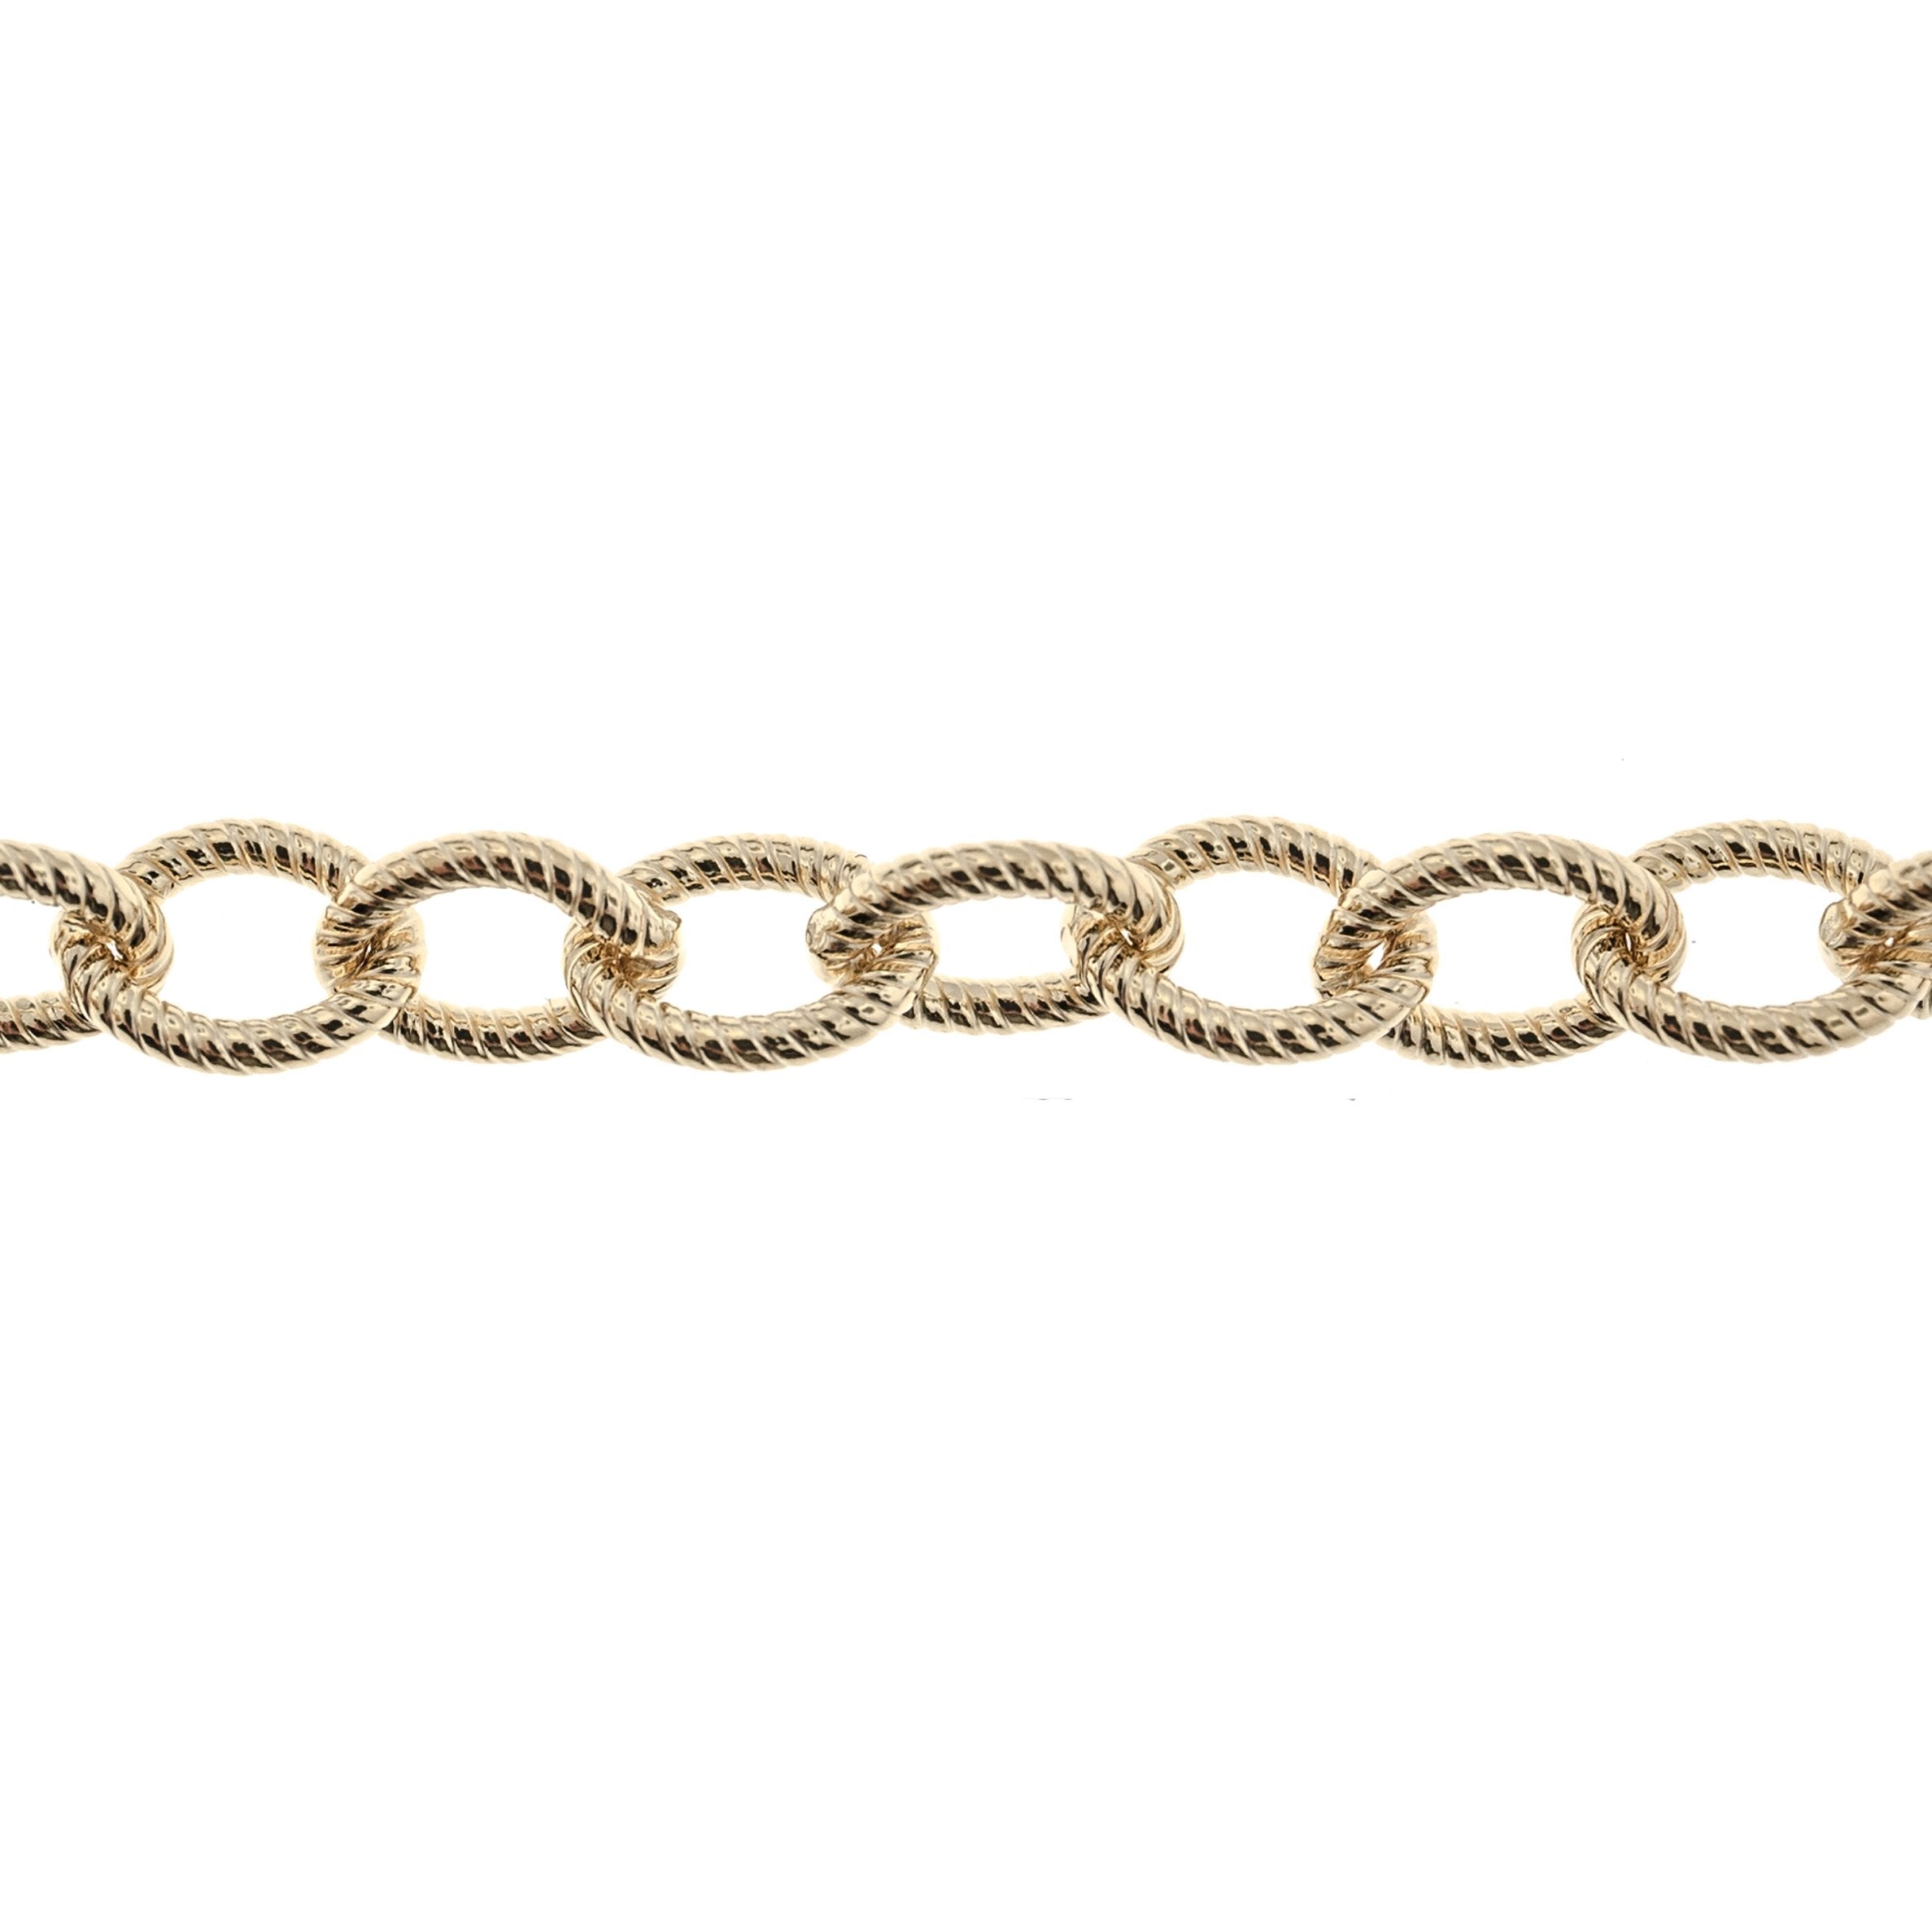 14/20 Yellow Gold-Filled 5.7MM Twisted Cable Chain